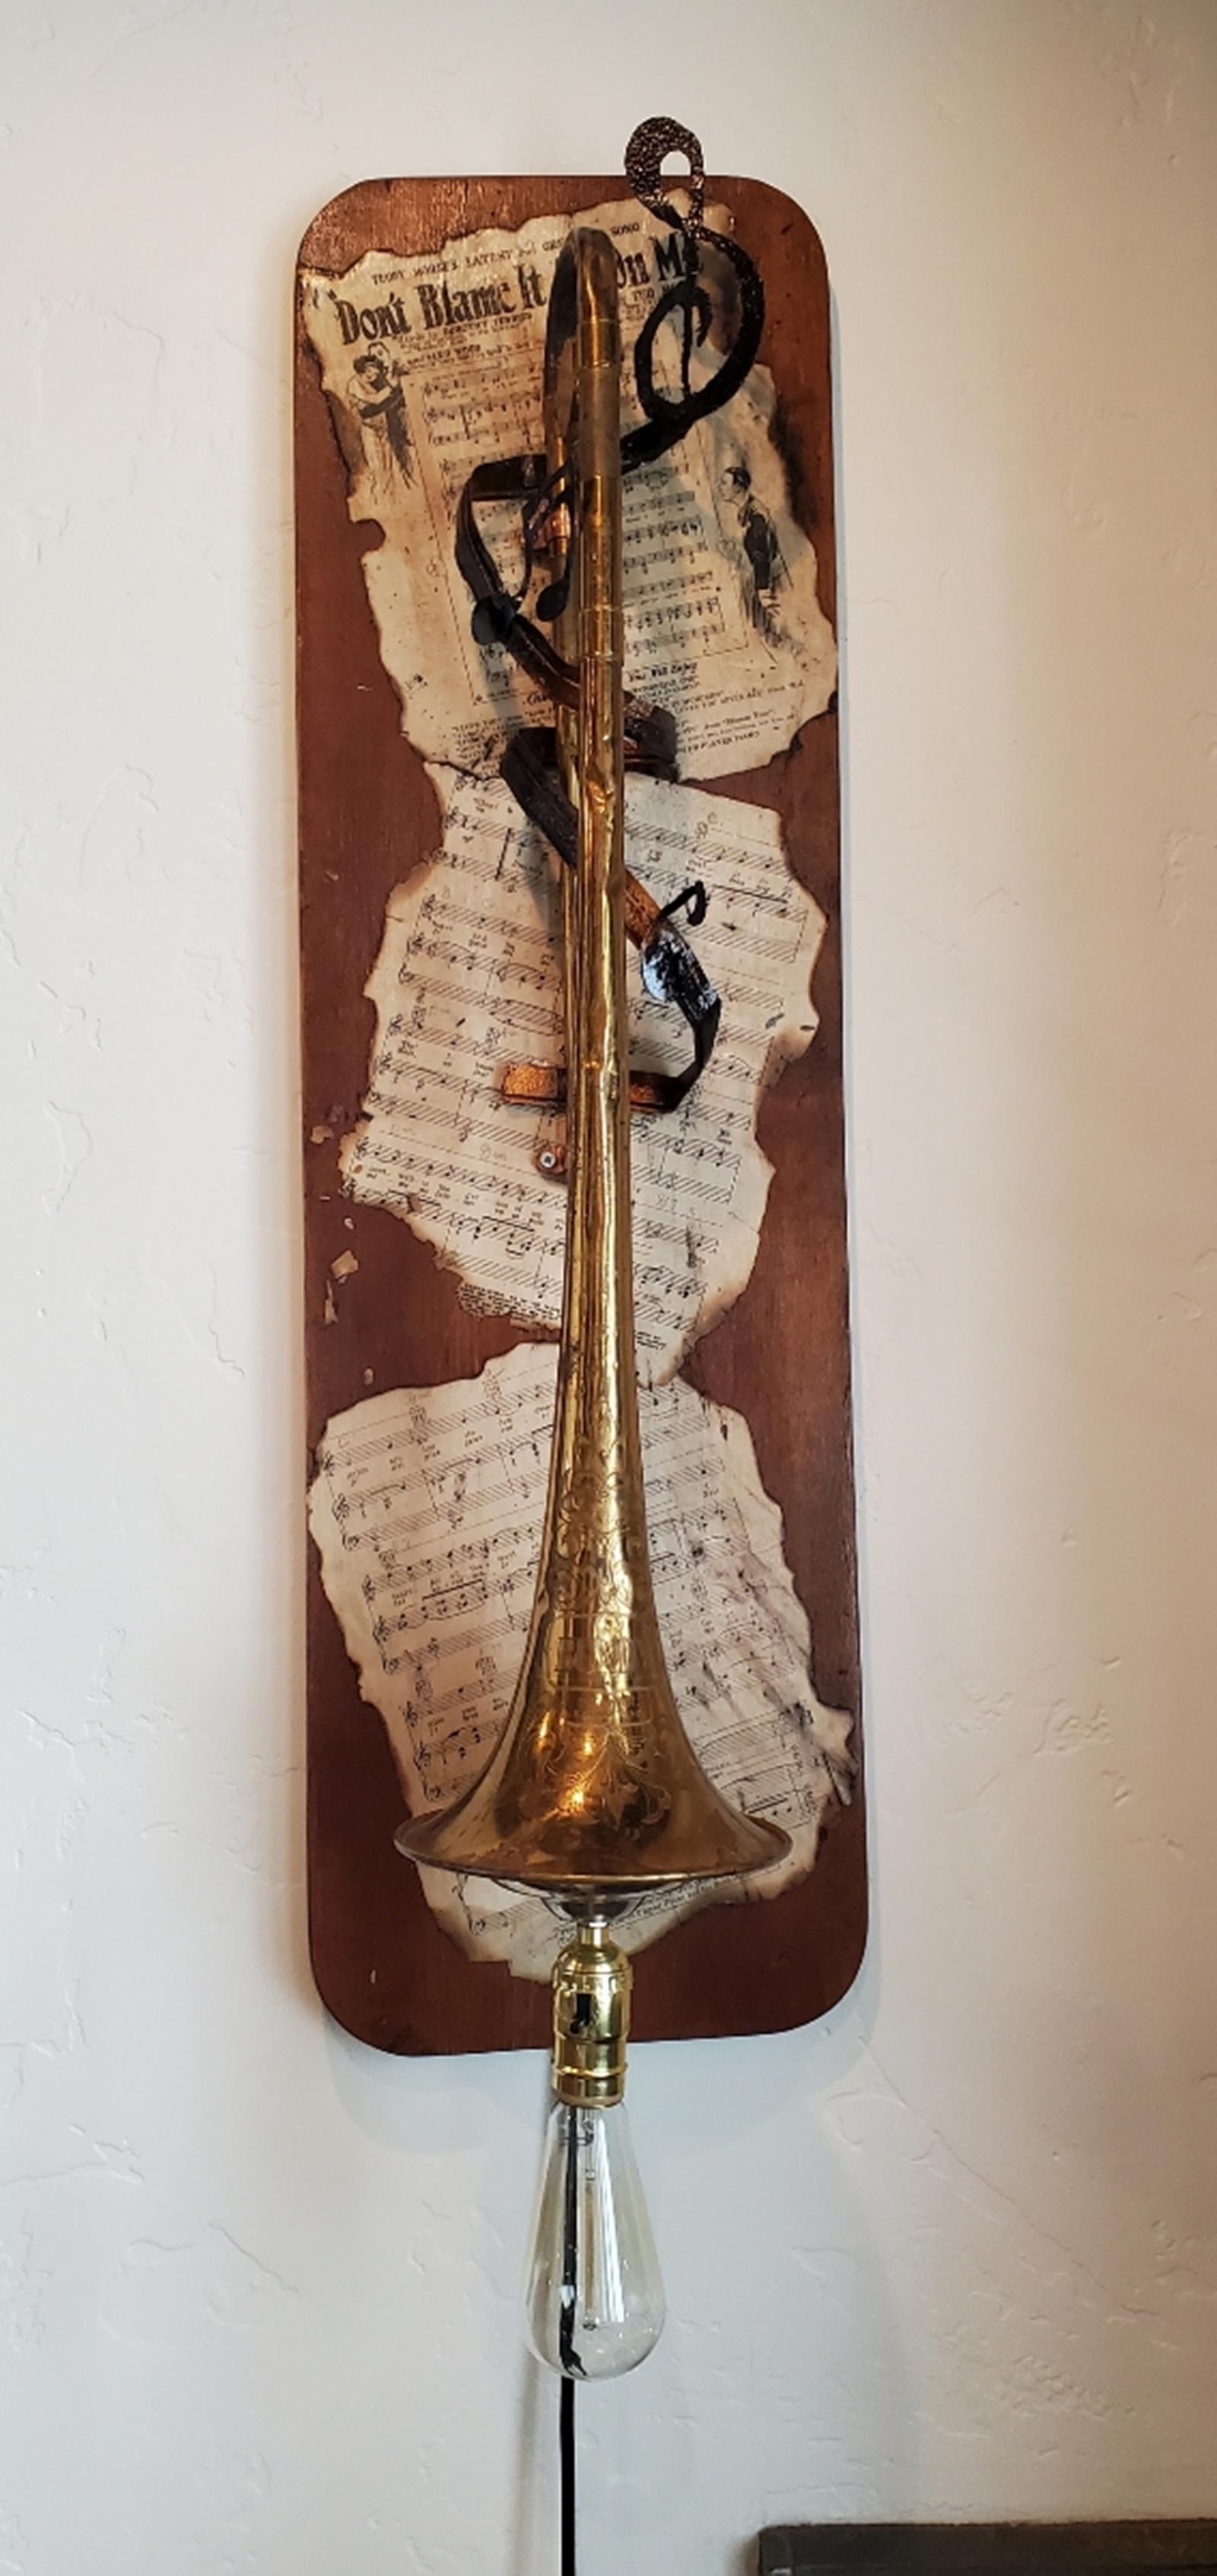 We love making old musical instrument into lamps. Home Decor, Unique Furniture &amp; Garden Art. Ame(..)